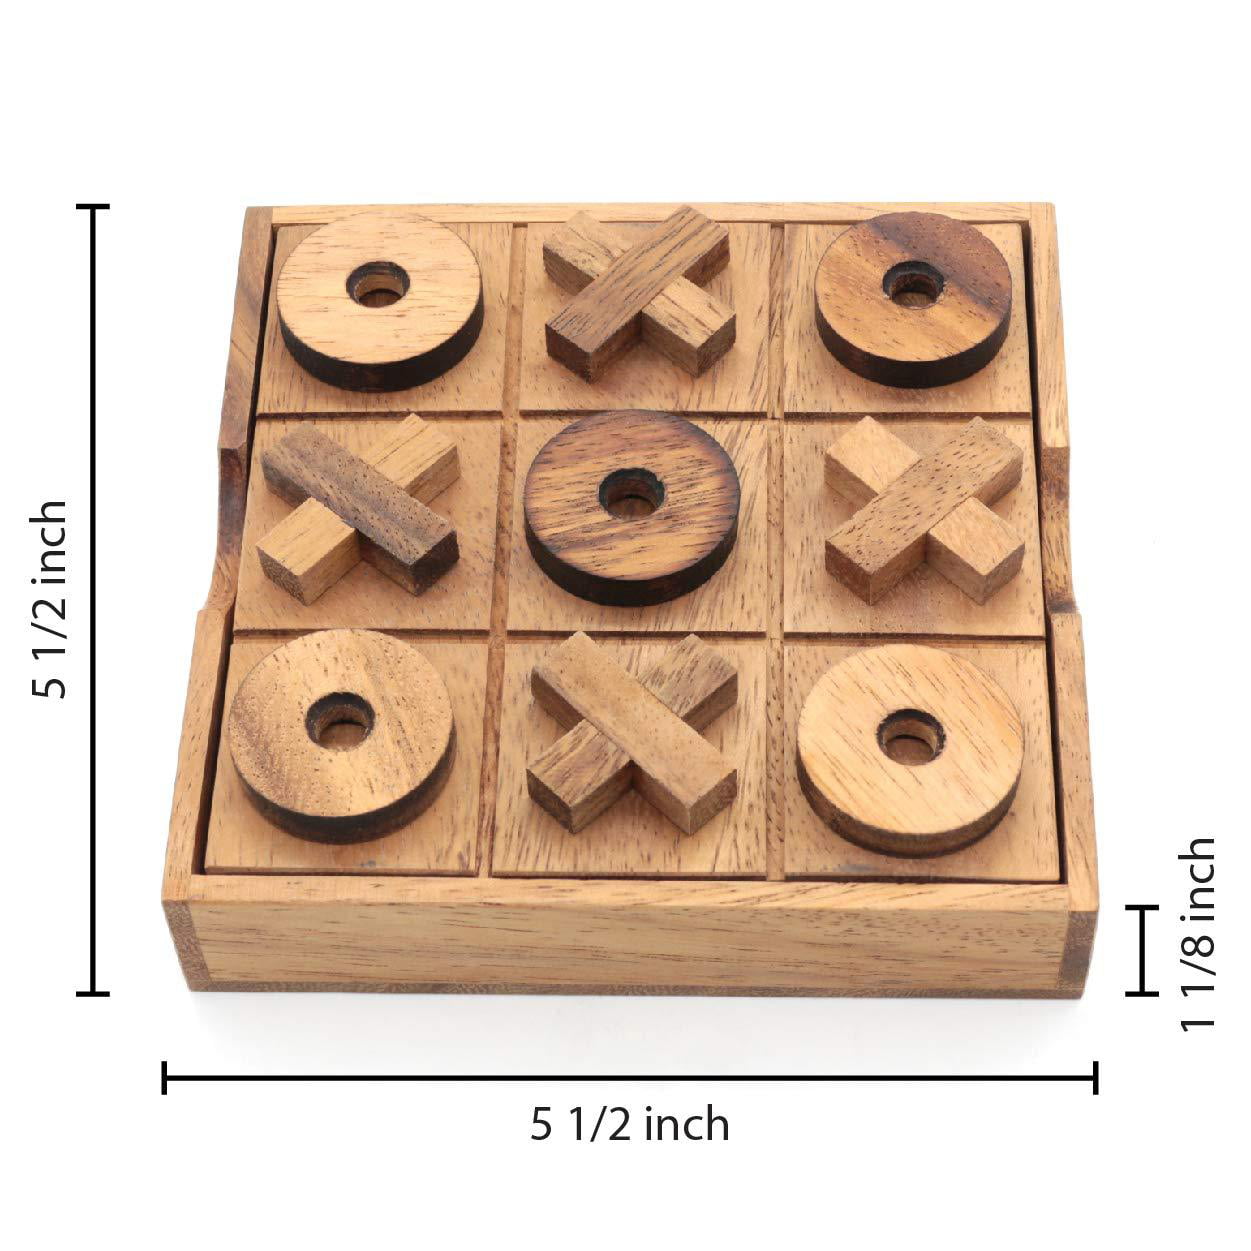 BSIRI Tic Tac Toe for Kids and Adults Coffee Table Living Room Decor and Desk Decor Family Games Night Classic Board Games Wood Rustic for Families Size 4 Inch 